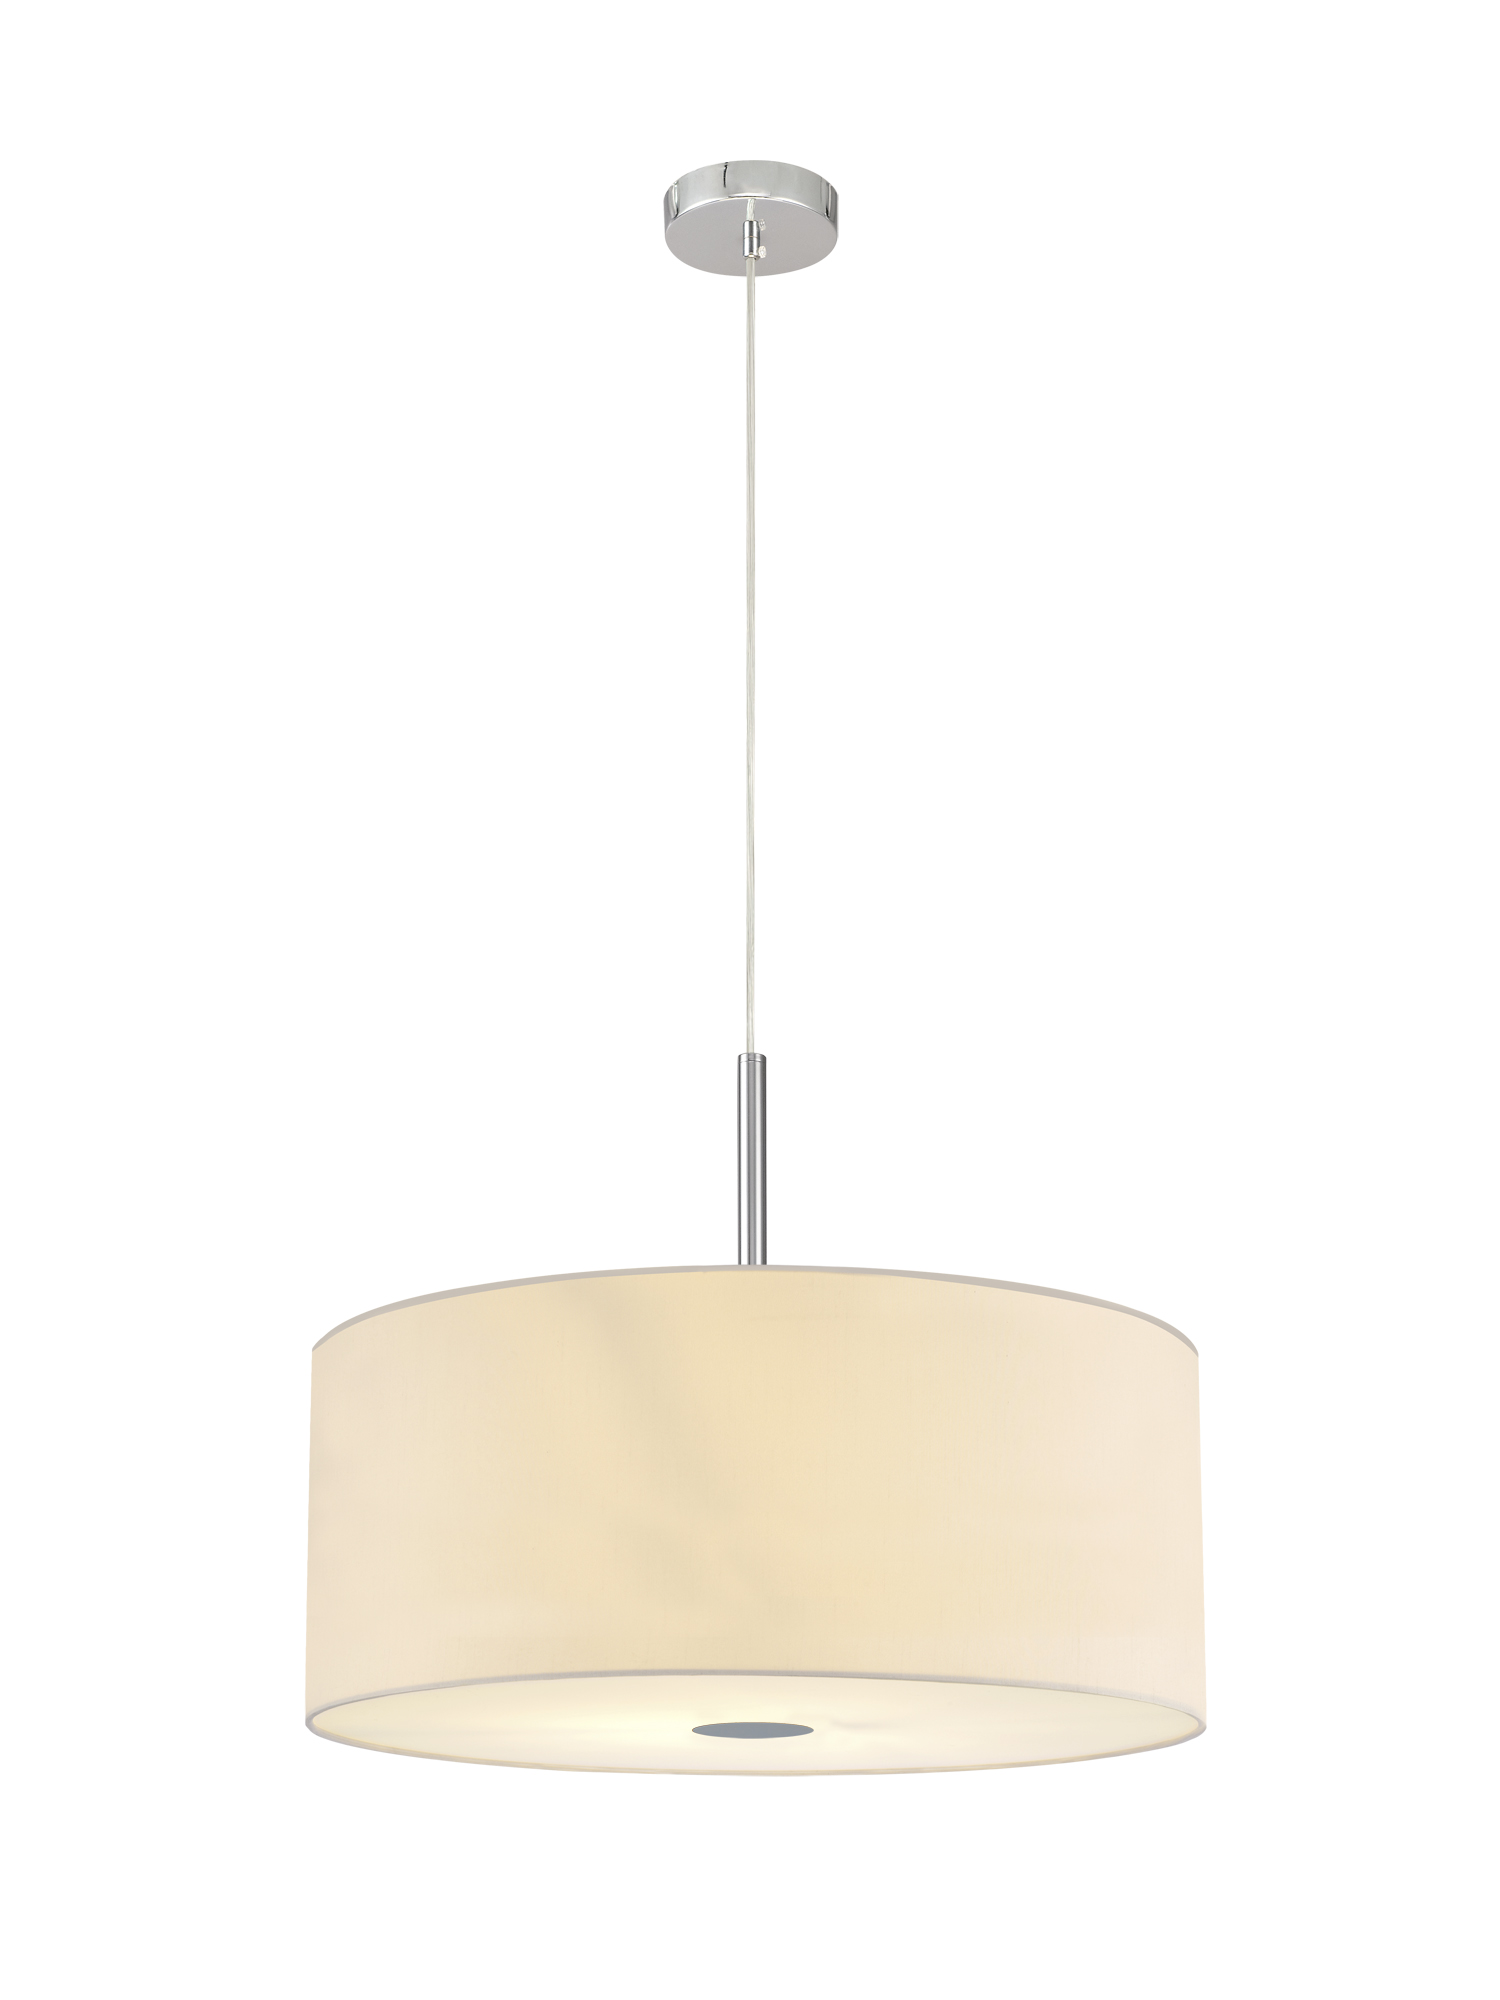 Baymont 60cm 5 Light Pendant Polished Chrome; Ivory Pearl/White; Frosted Diffuser DK0475  Deco Baymont CH IV